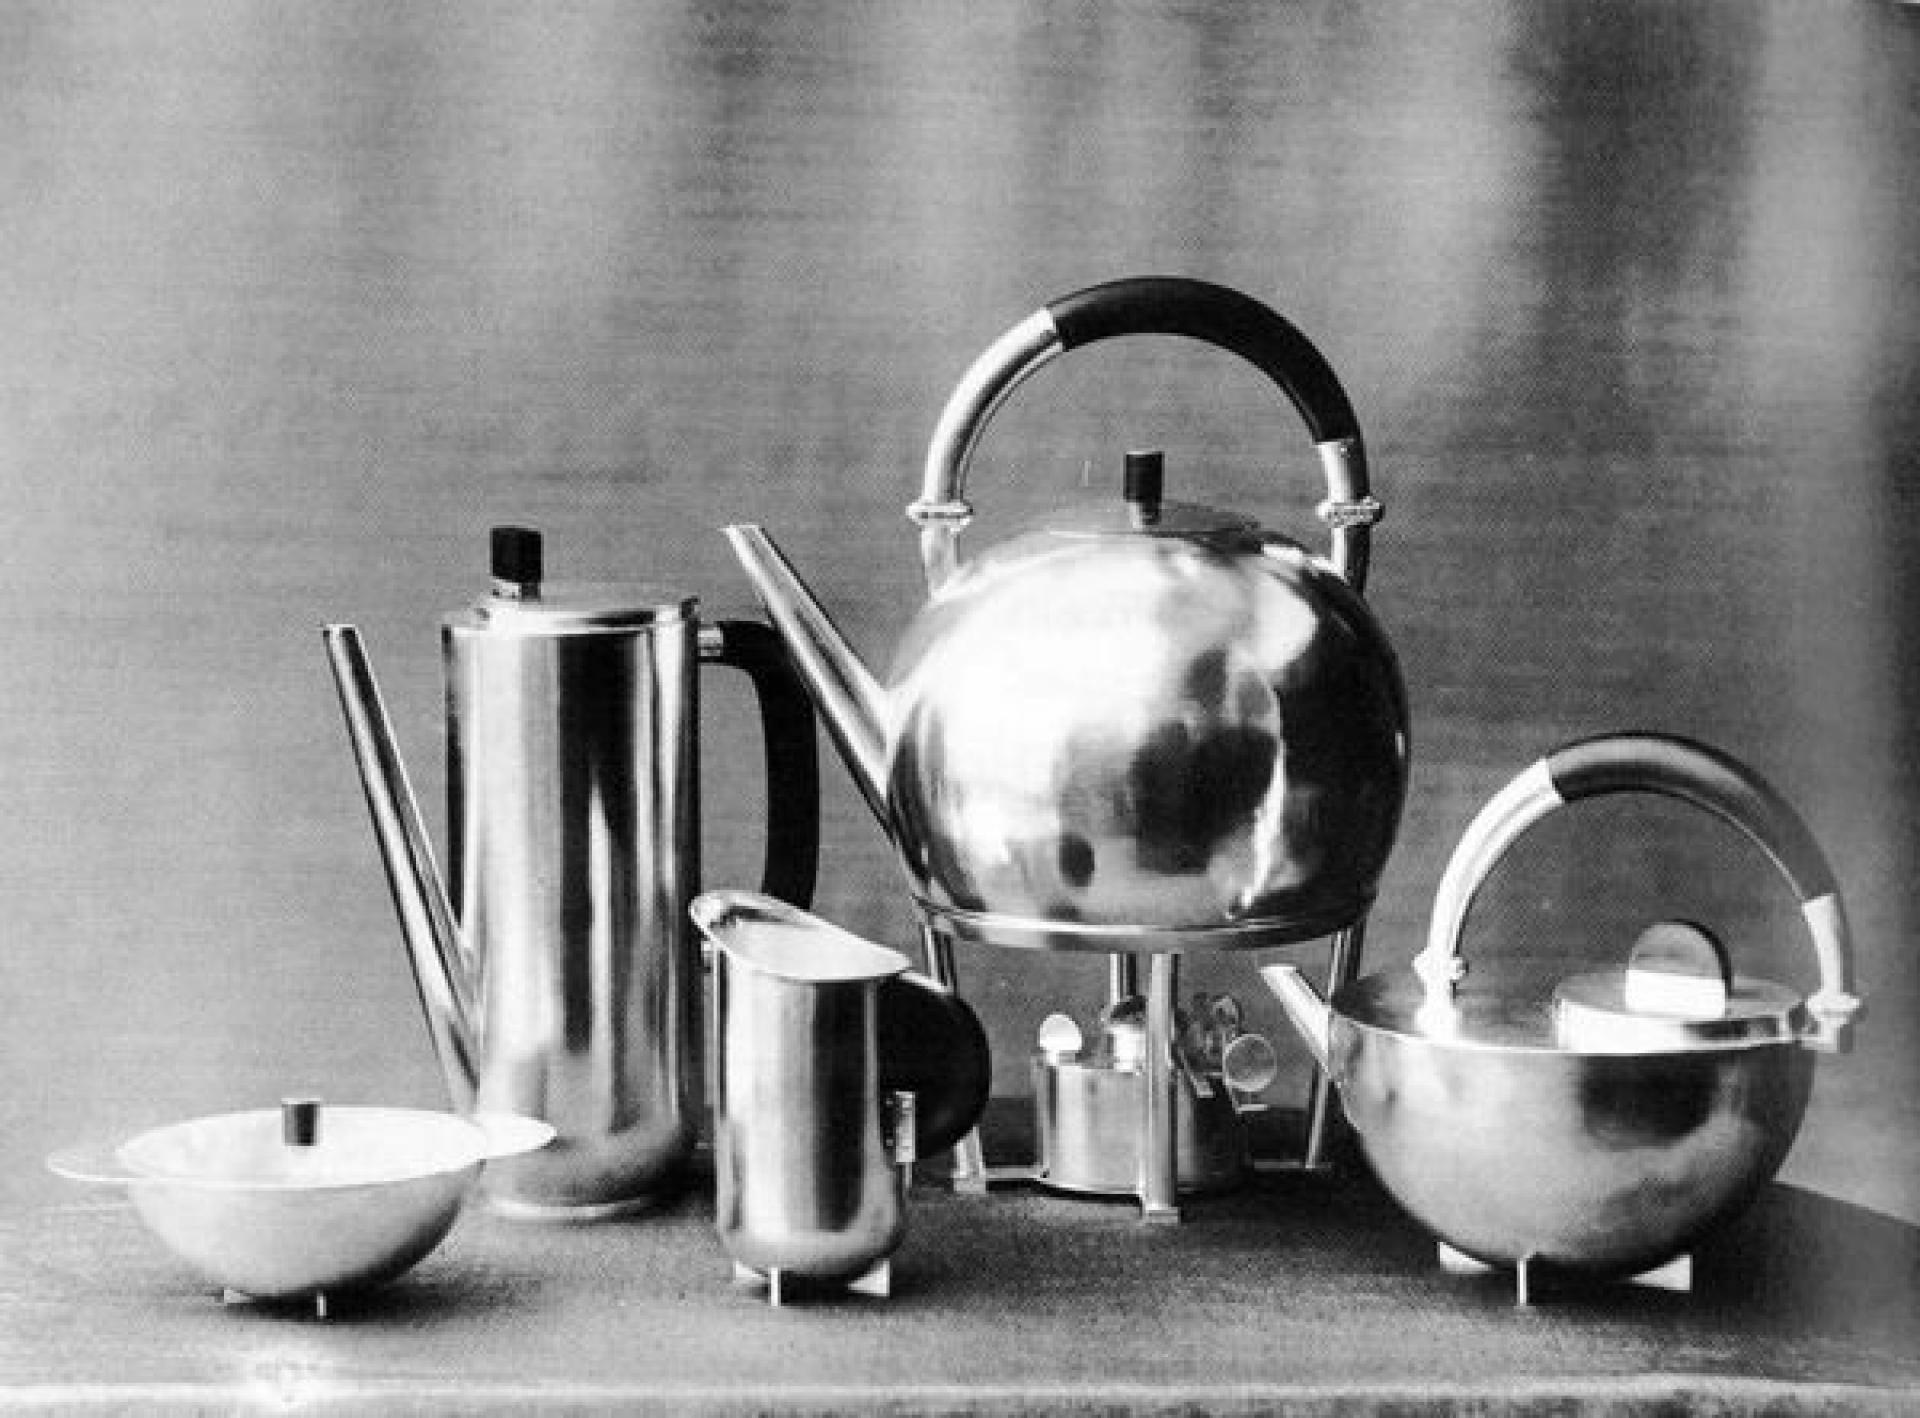 Coffee and tea set by Marianne Brandt (1924). | Photo by Lucia Moholy